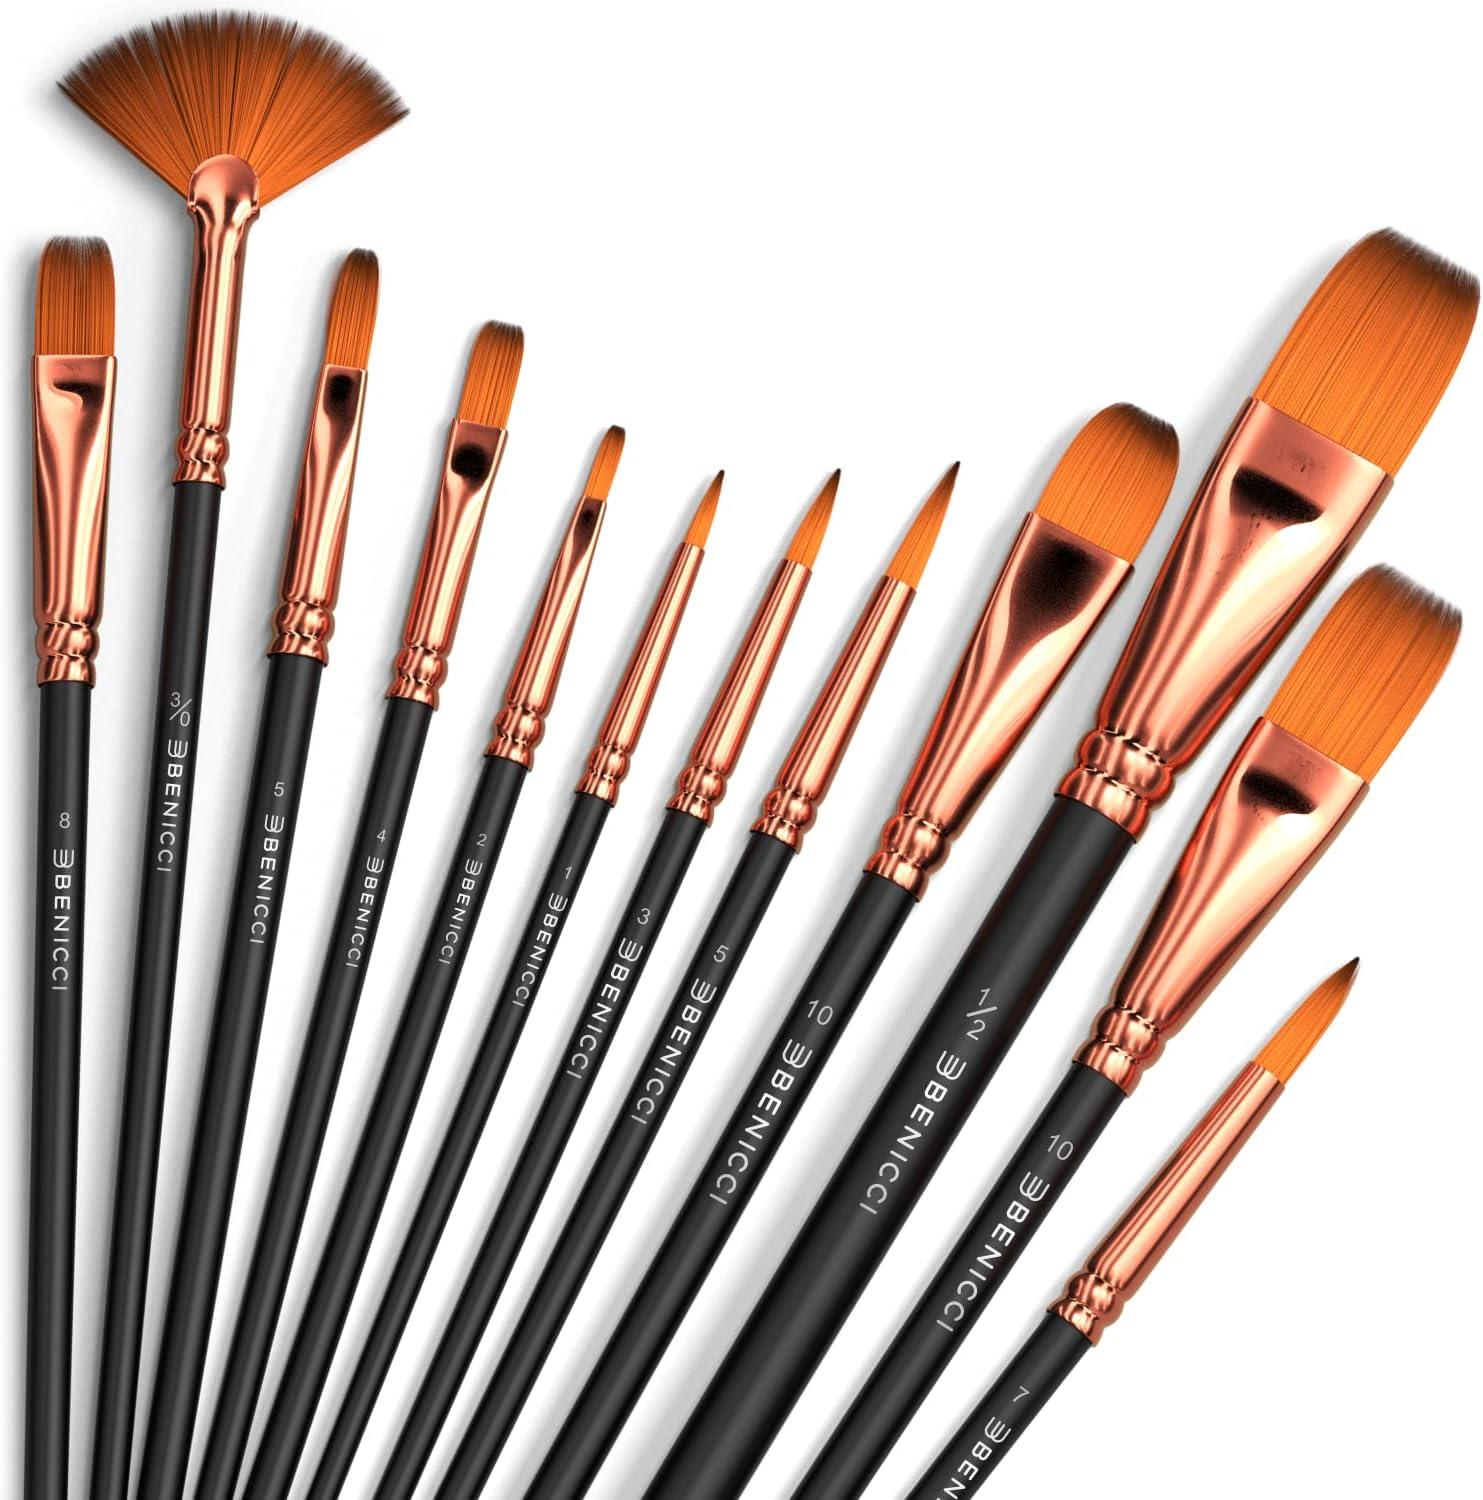 Professional Paint Brushes Set - Paint Brush with Oil Painting